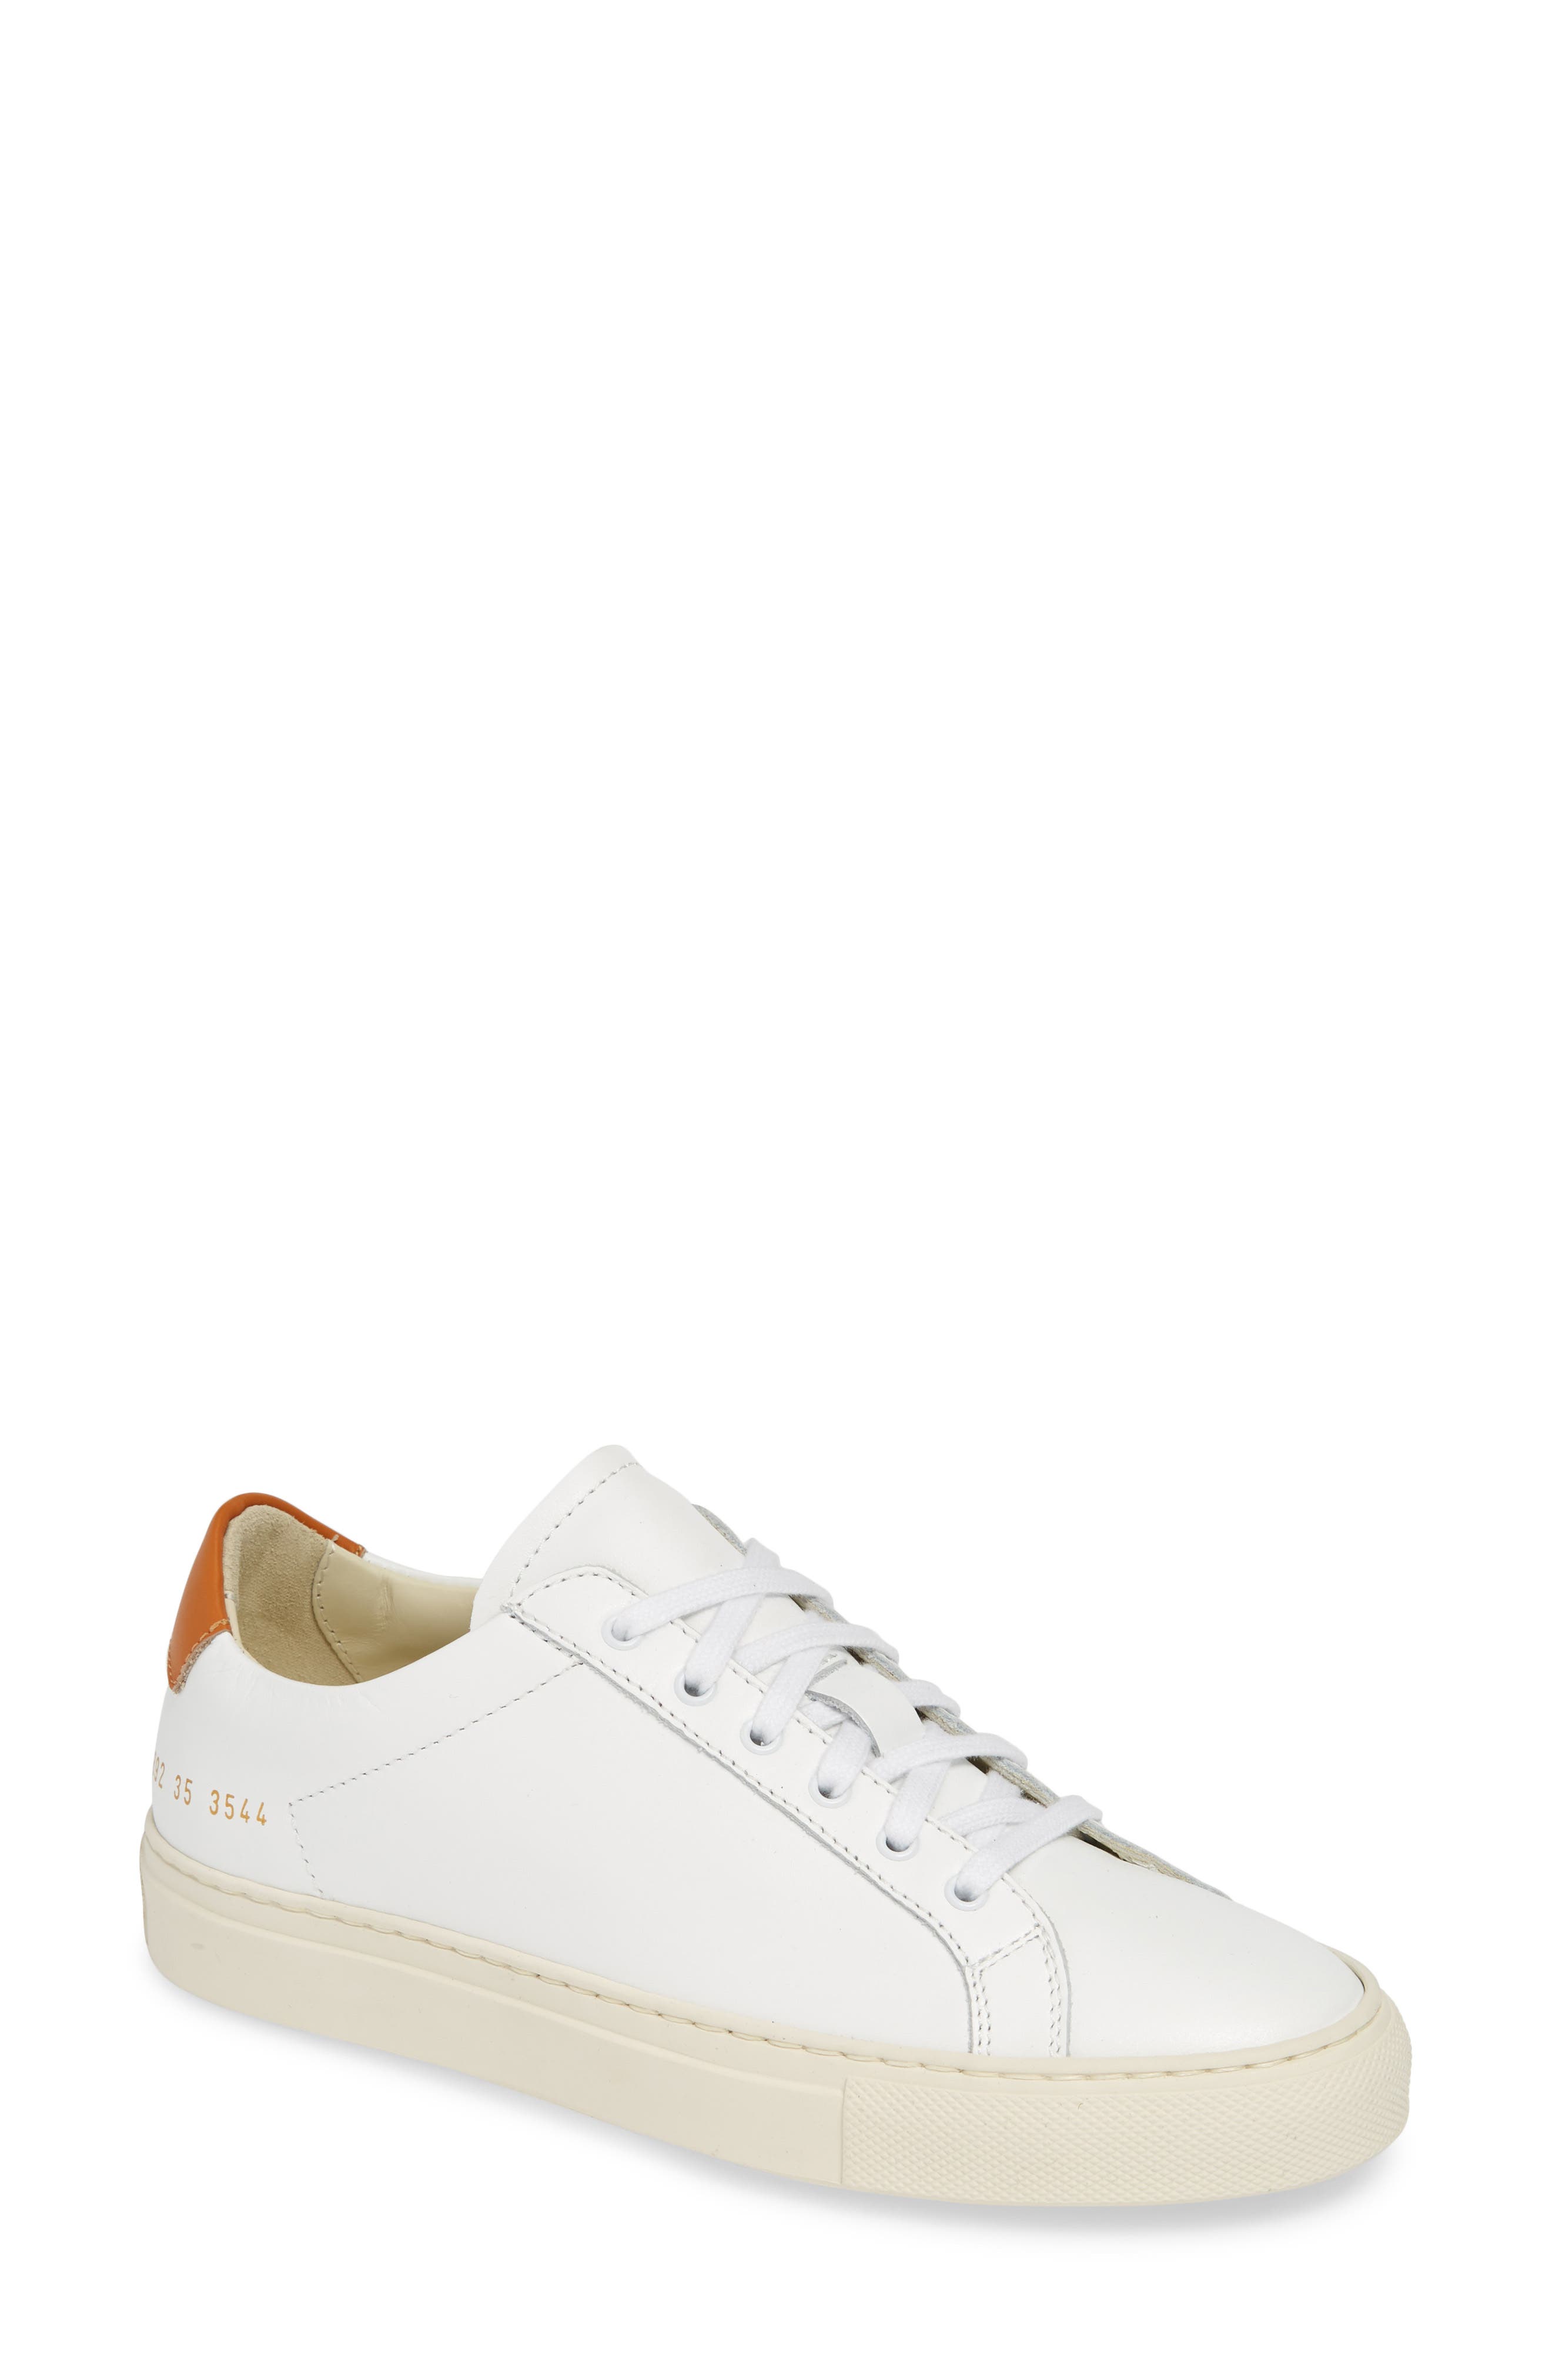 common projects nordstrom